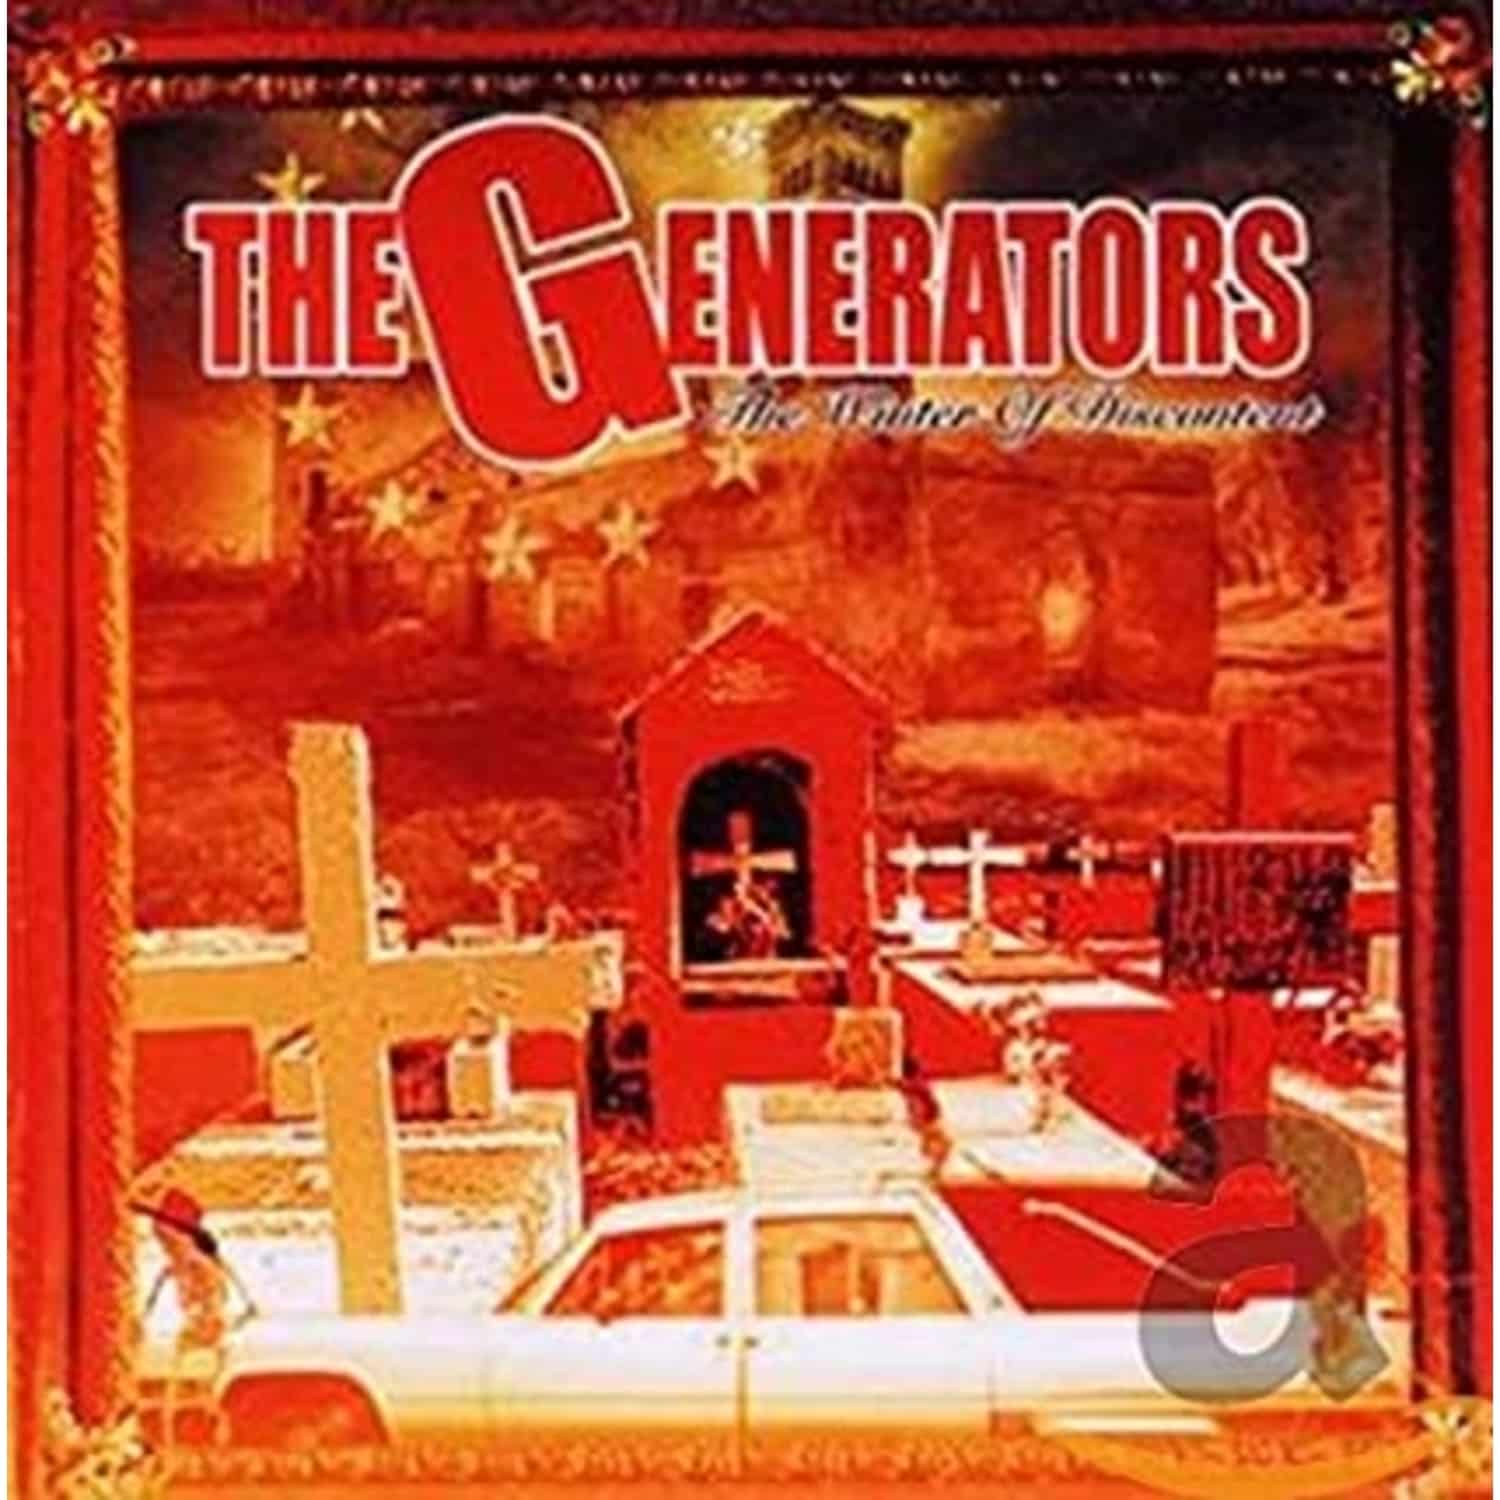  The Generators - THE WINTER OF DISCONTENT 